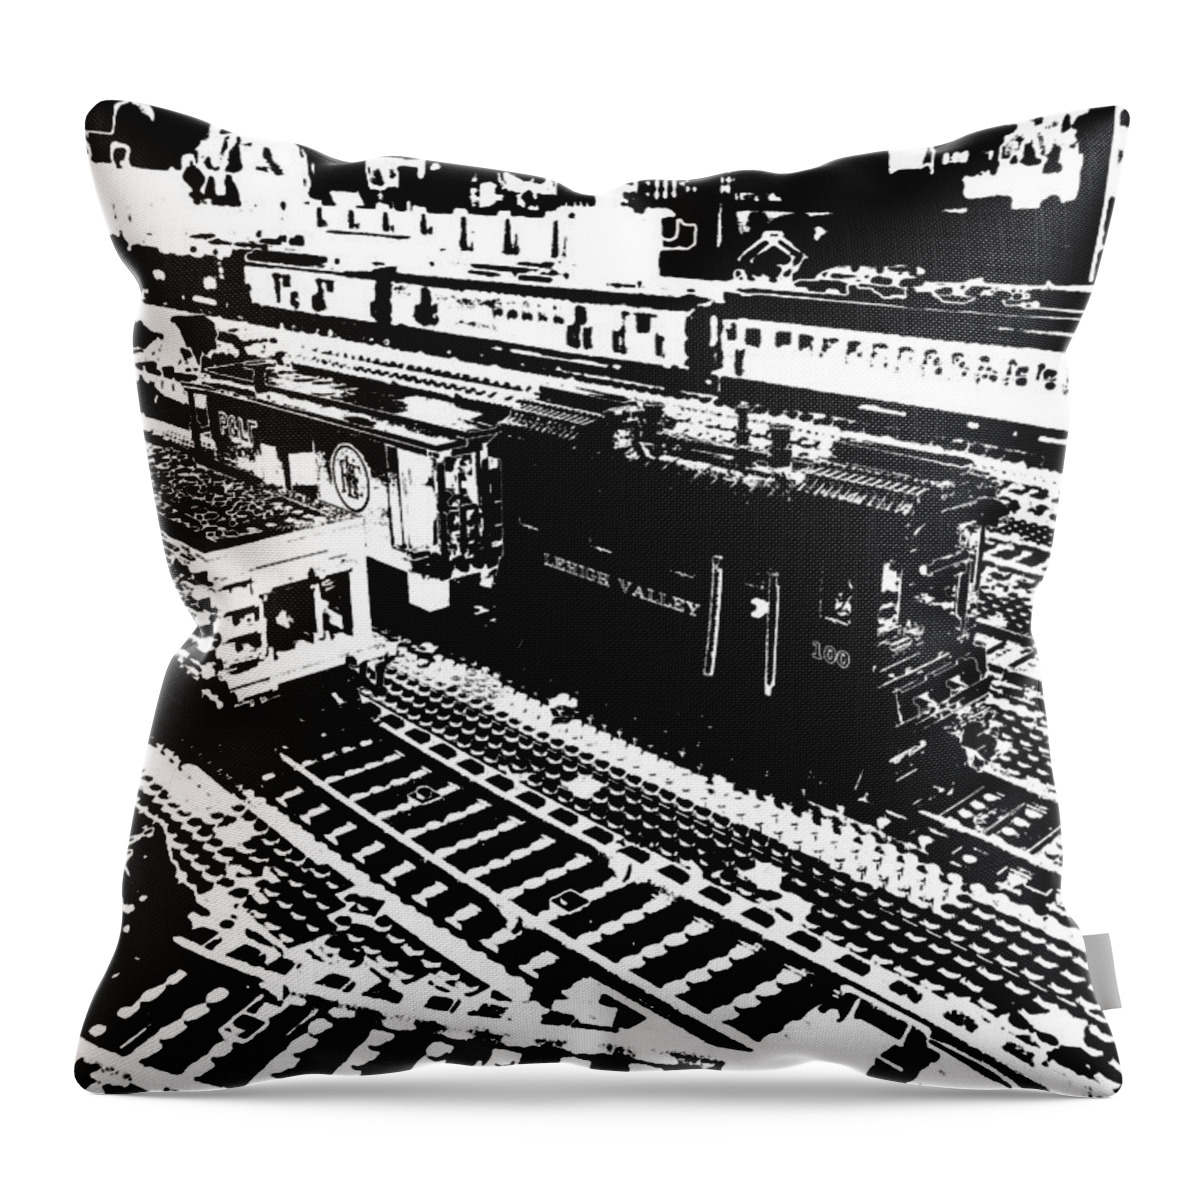 Lego Throw Pillow featuring the photograph Lego Junction by Richard Reeve